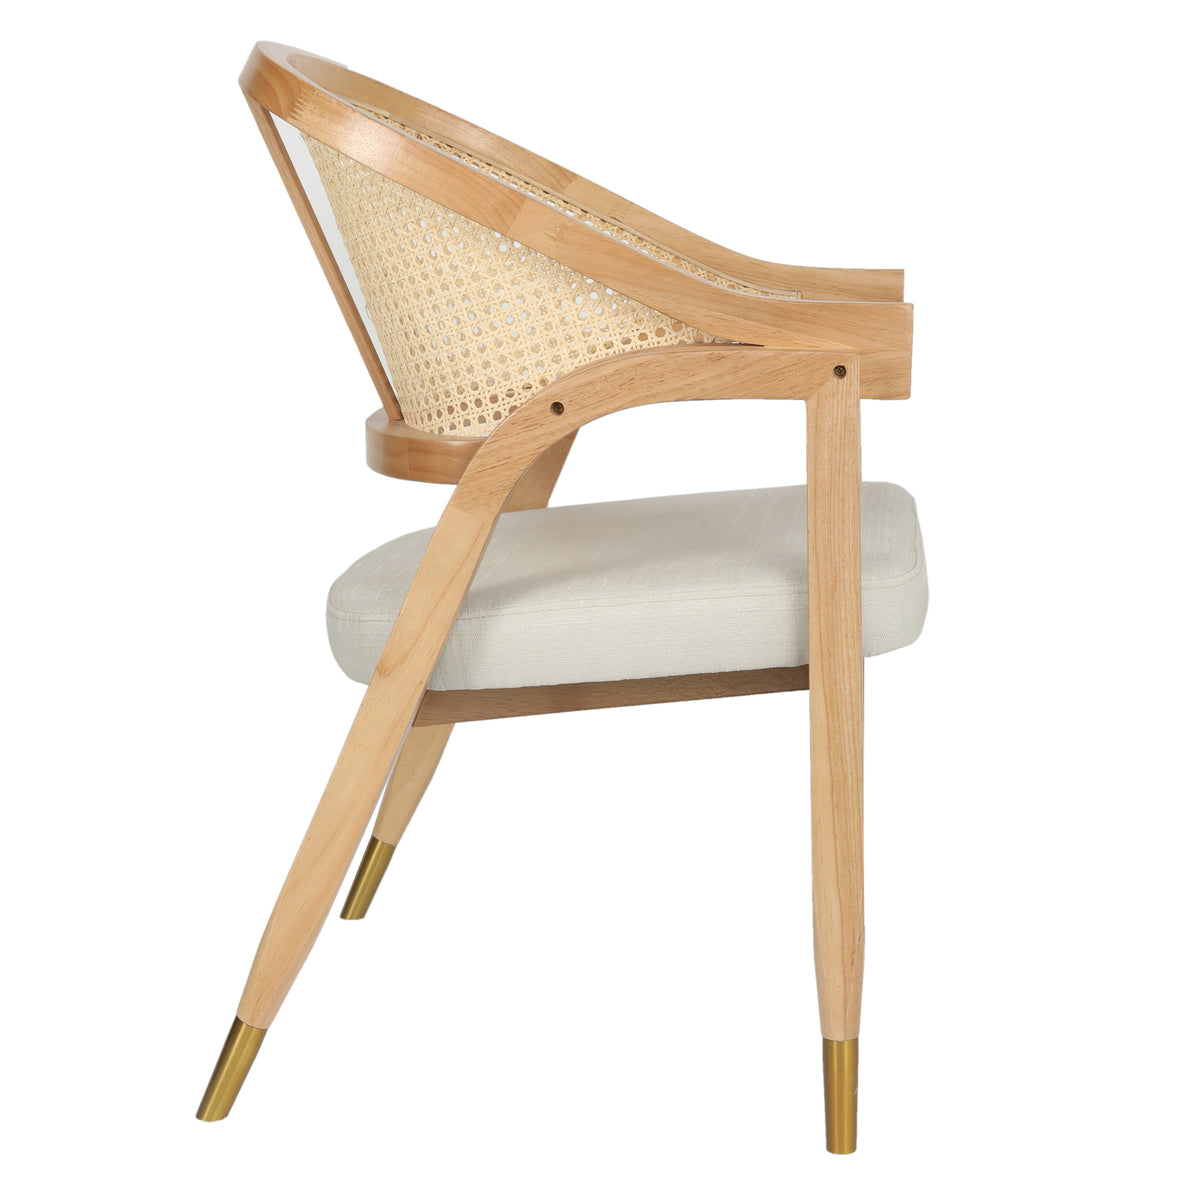 Natural |#| Commercial Grade Cane Rattan Dining Chair with Padded Seat - Natural